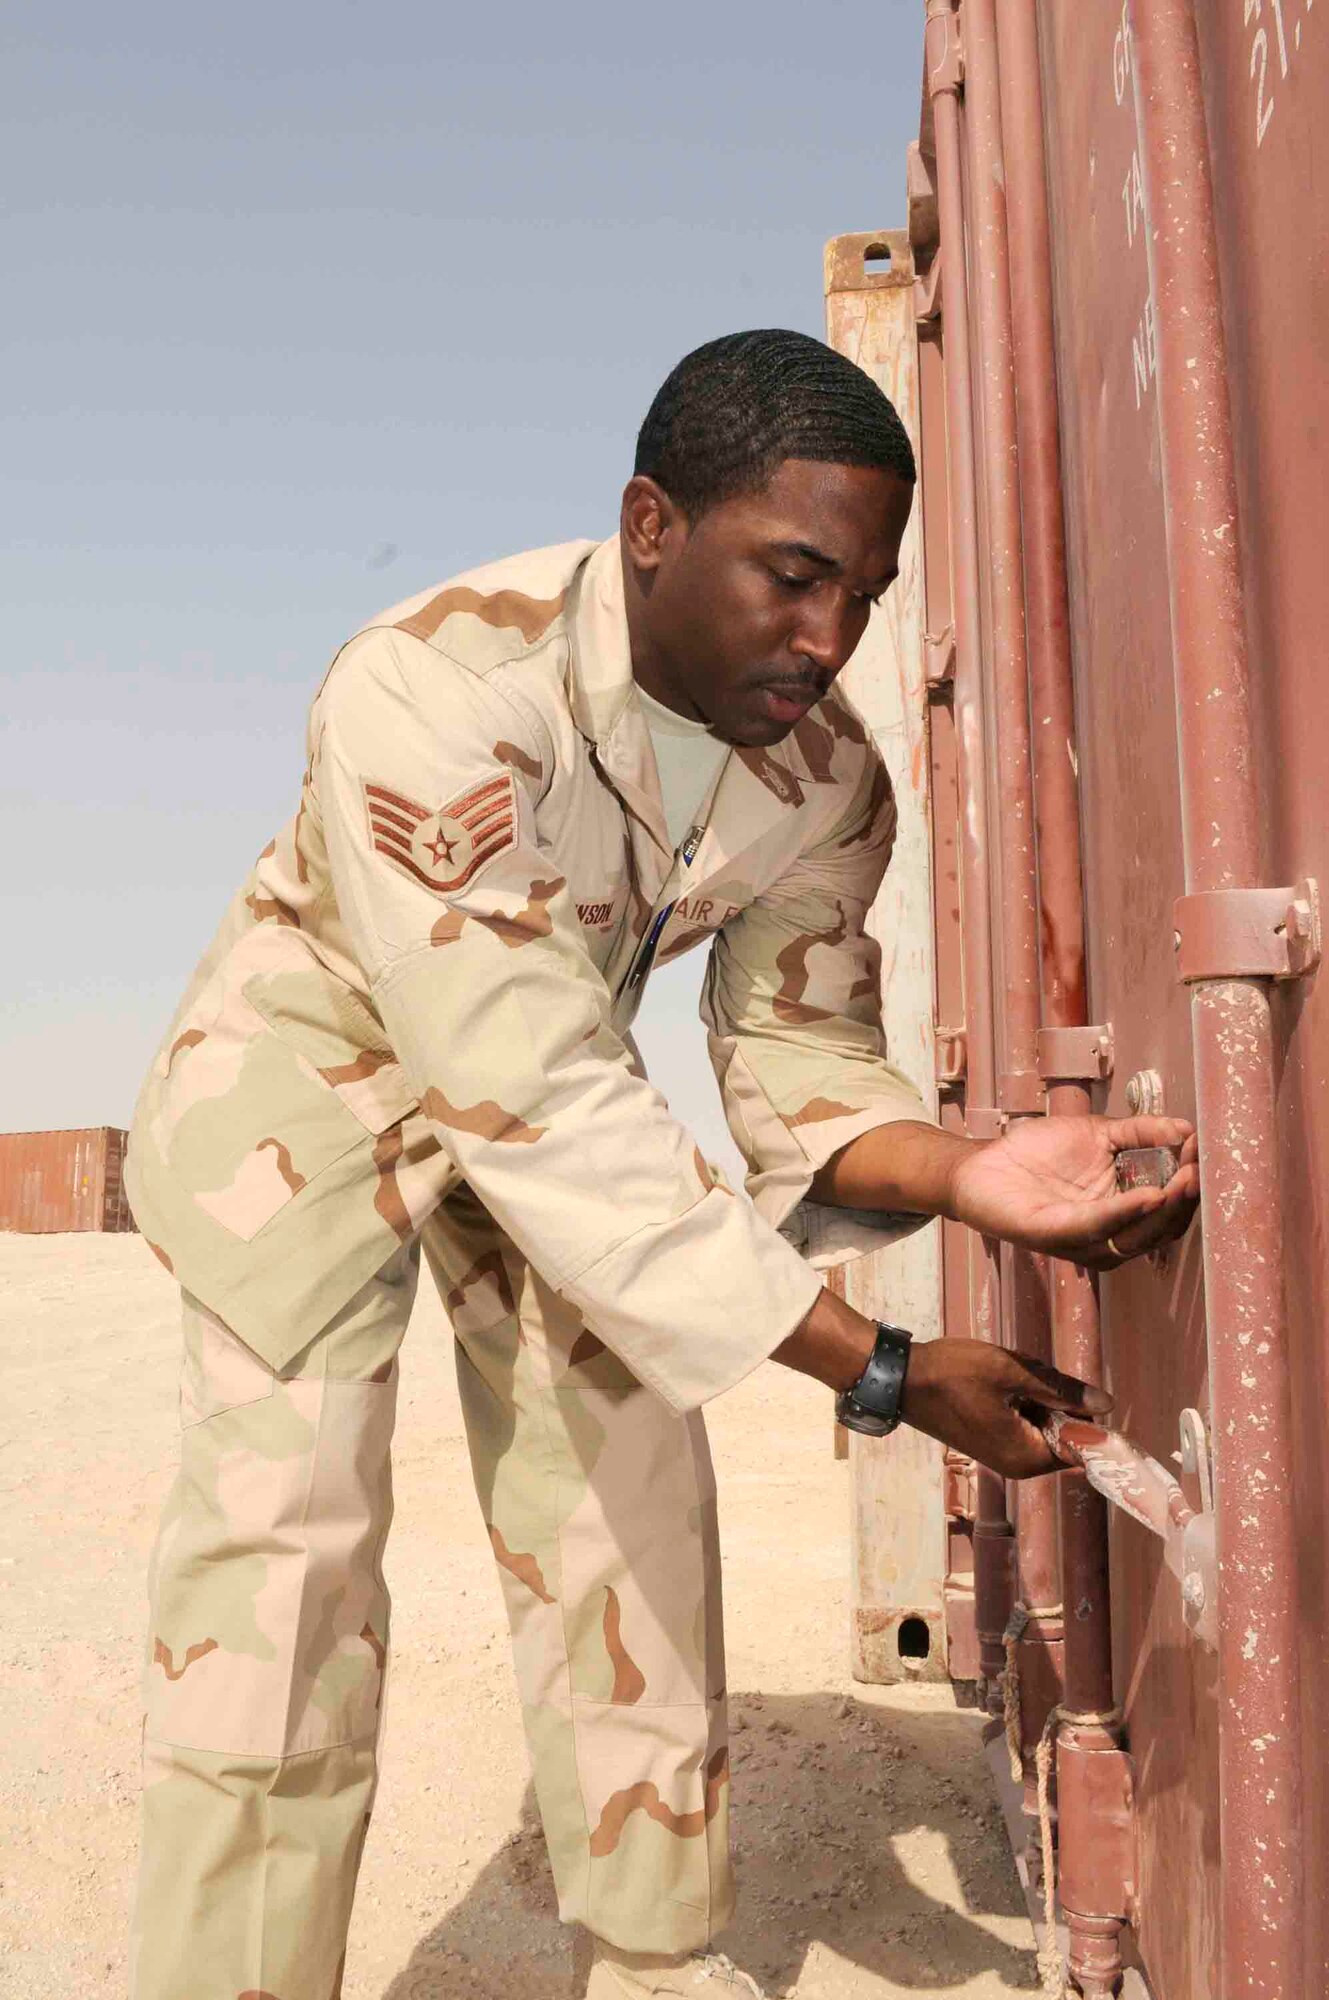 Staff Sgt. Maurice Johnson, 379th Expeditionary Logistics Readiness Squadron, opens a storage container to ensure it is ready for transport at a Southwest Asia air base April 24. The 379th ELRS has removed more than 500 storage containers in less than 60 days. (U.S. Air Force photo by Tech. Sgt. Johnny Saldivar.)